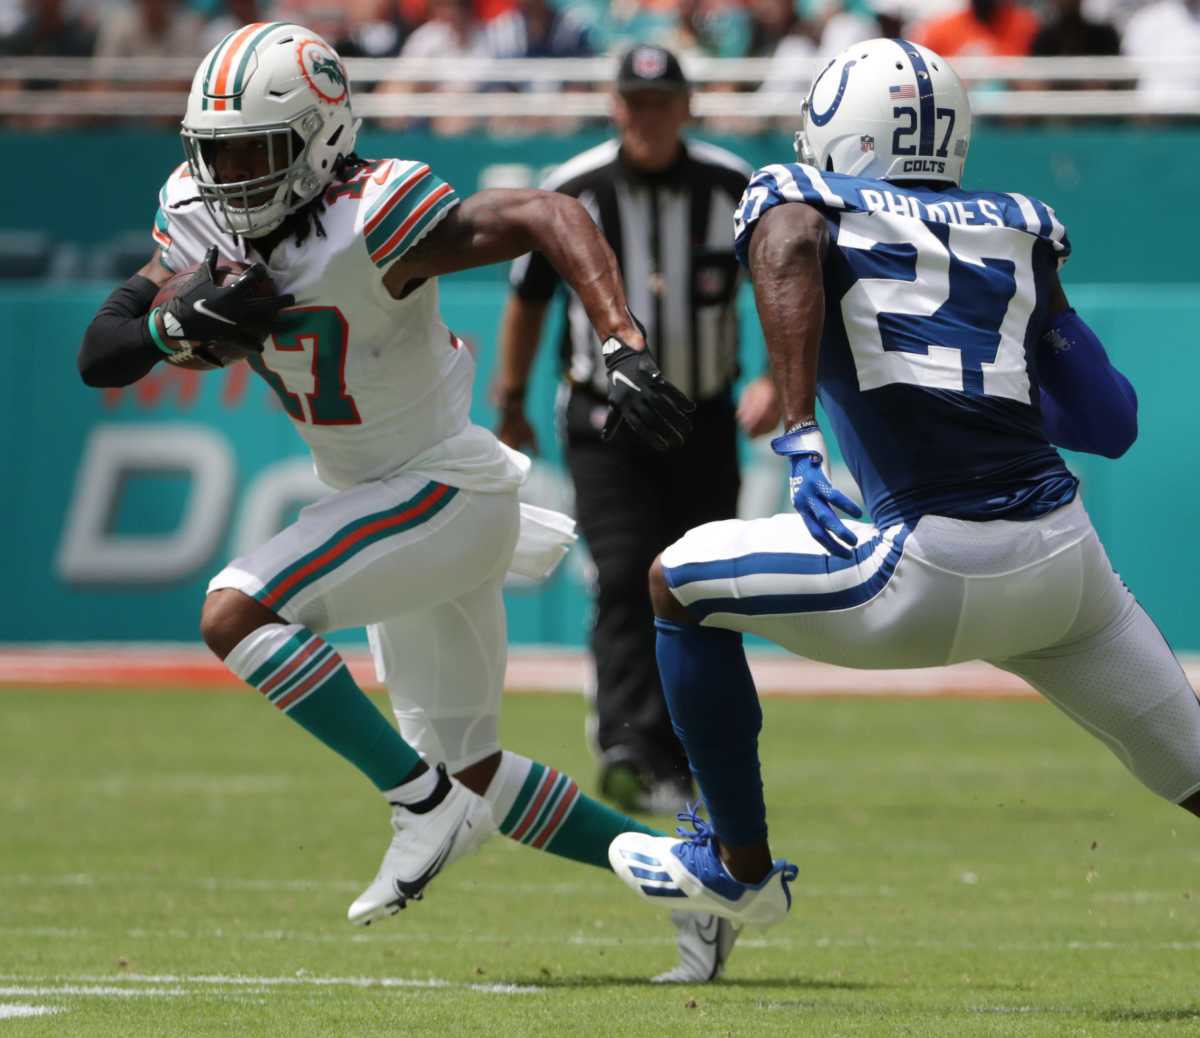 Jaylen Waddle of Miami looks to elude Xavier Rhodes of the Colts at Hard Rock Stadium in Miami Gardens, Fla., on Sunday, Oct. 3, 2021, during first half Miami vs. Indianapolis action. 100321 Coltsmiami 011 Jw